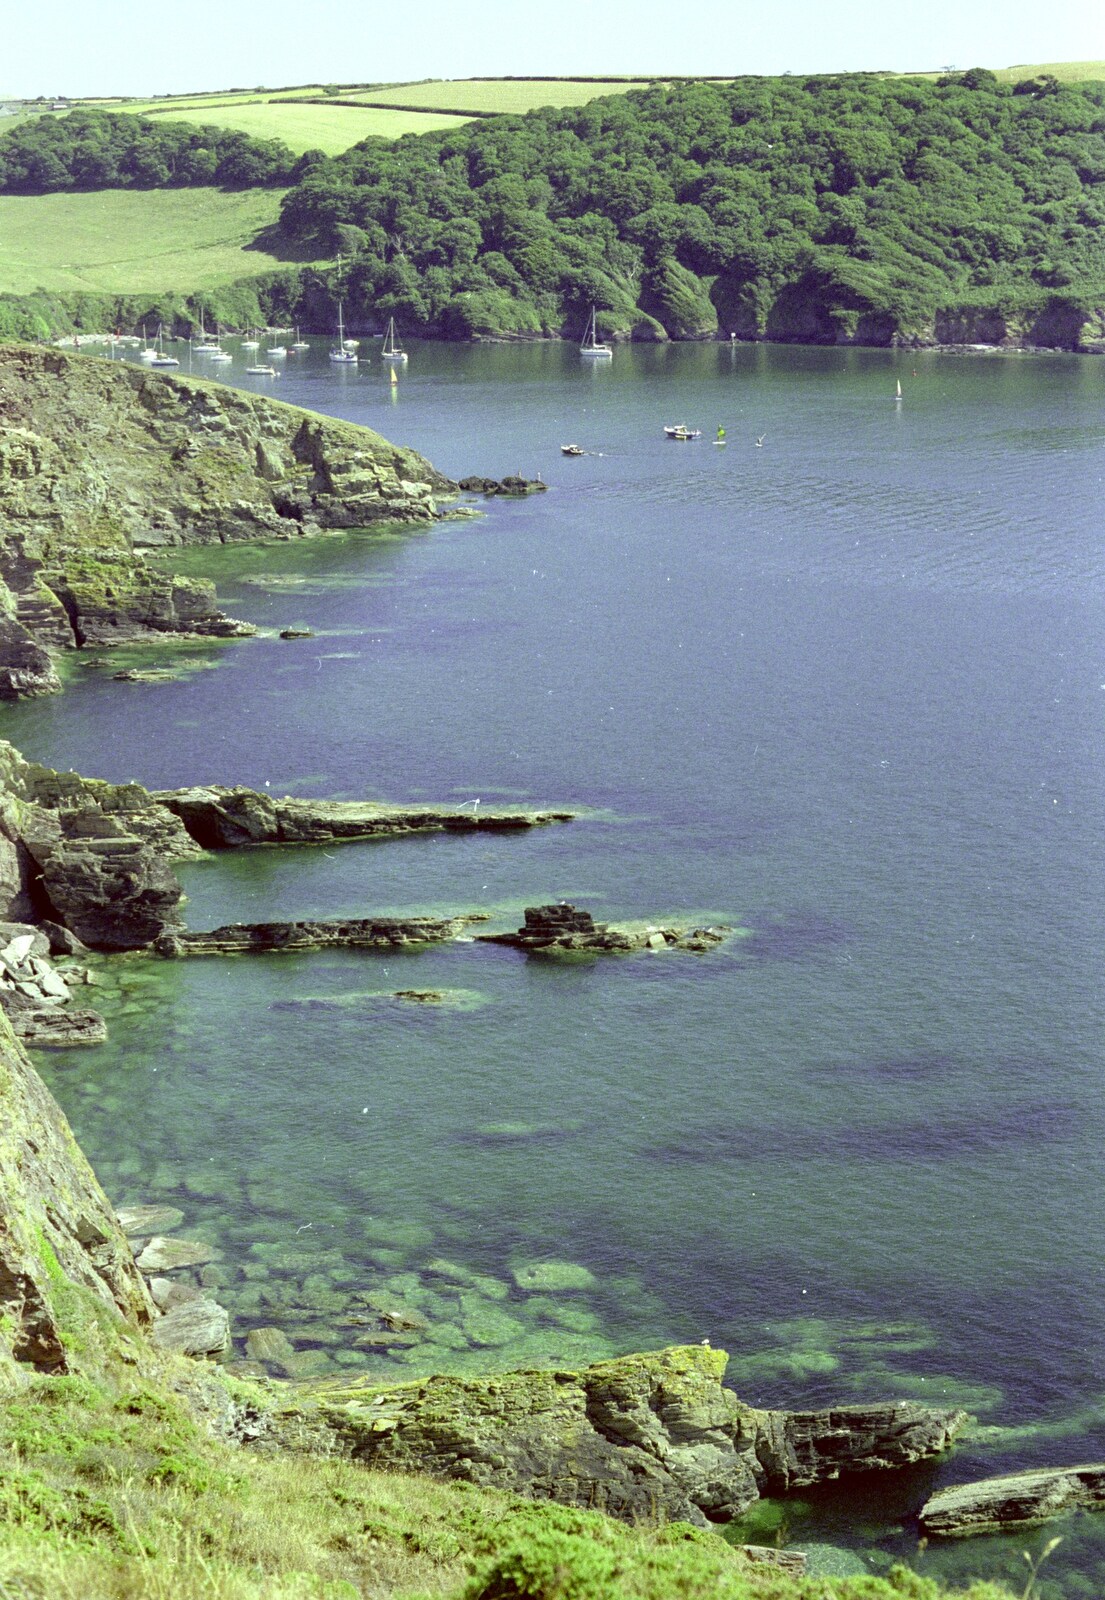 Uni: Country Clubs, On The Beach and Organs, Plymouth - 28th May 1989: Nice cliffs, possibly near the river by Salcombe